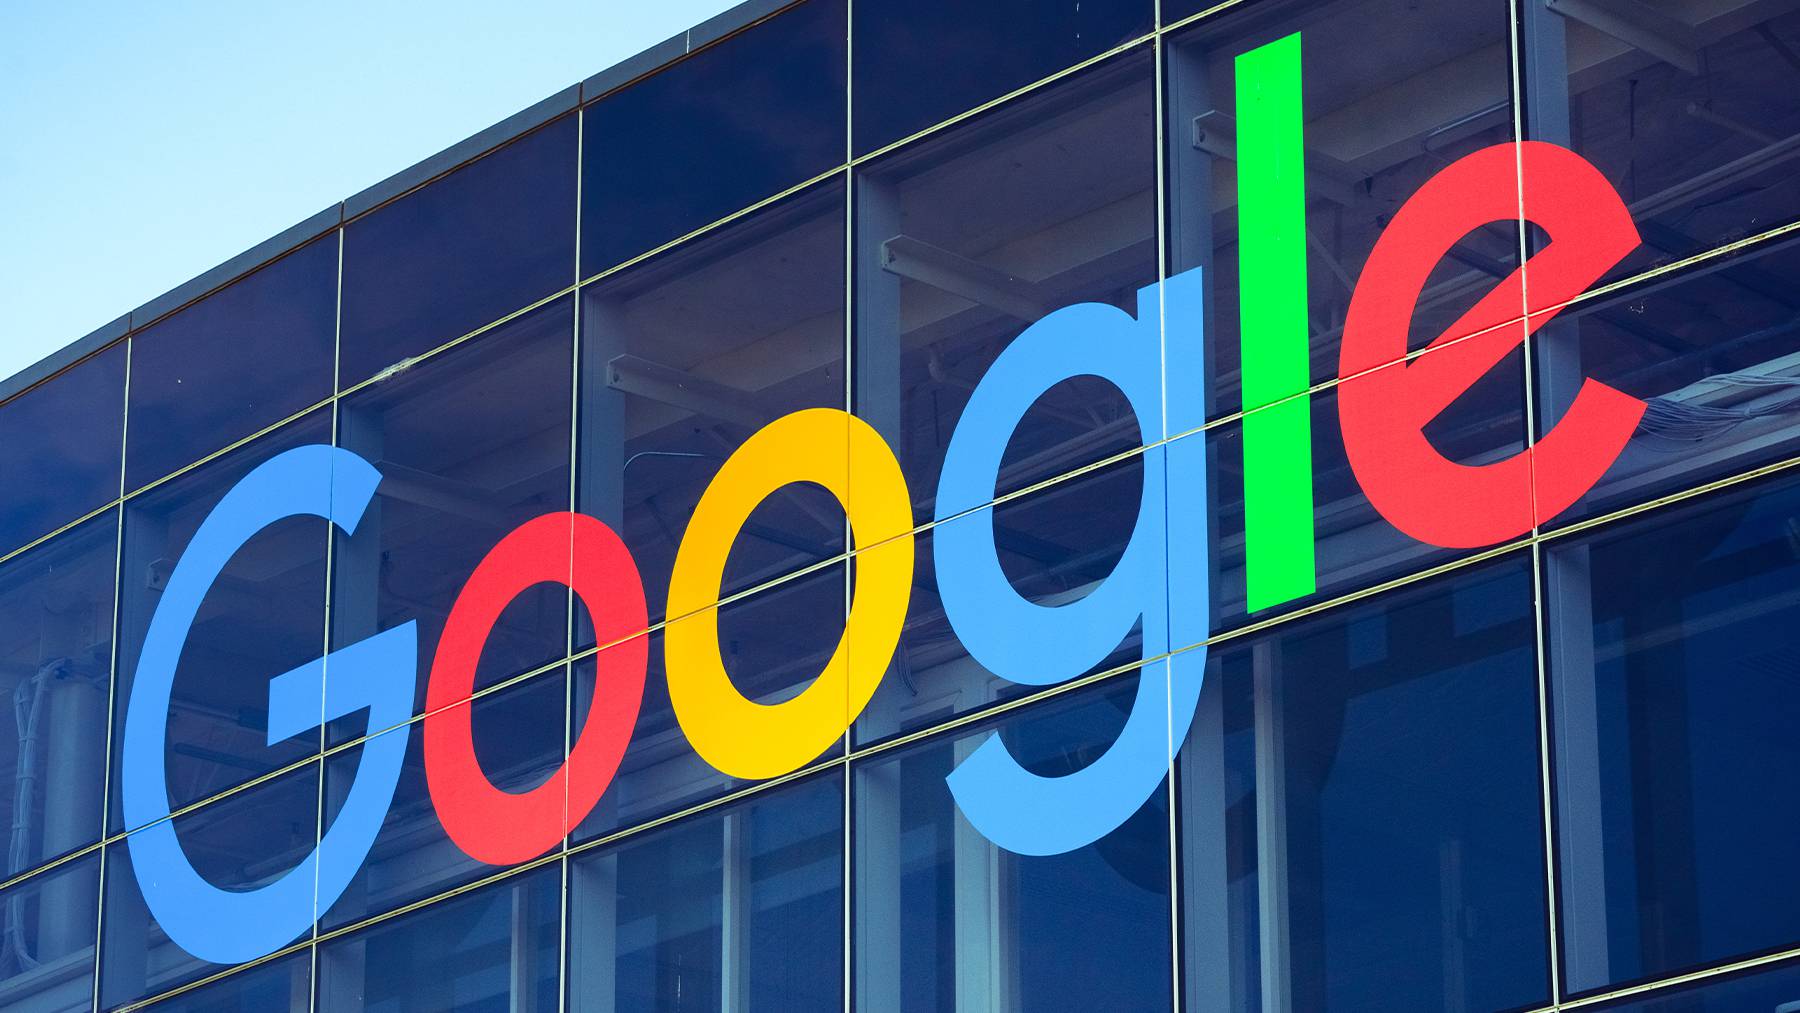 Google is debuting an experimental new search experience and will use its shopping vertical as a key testing ground.